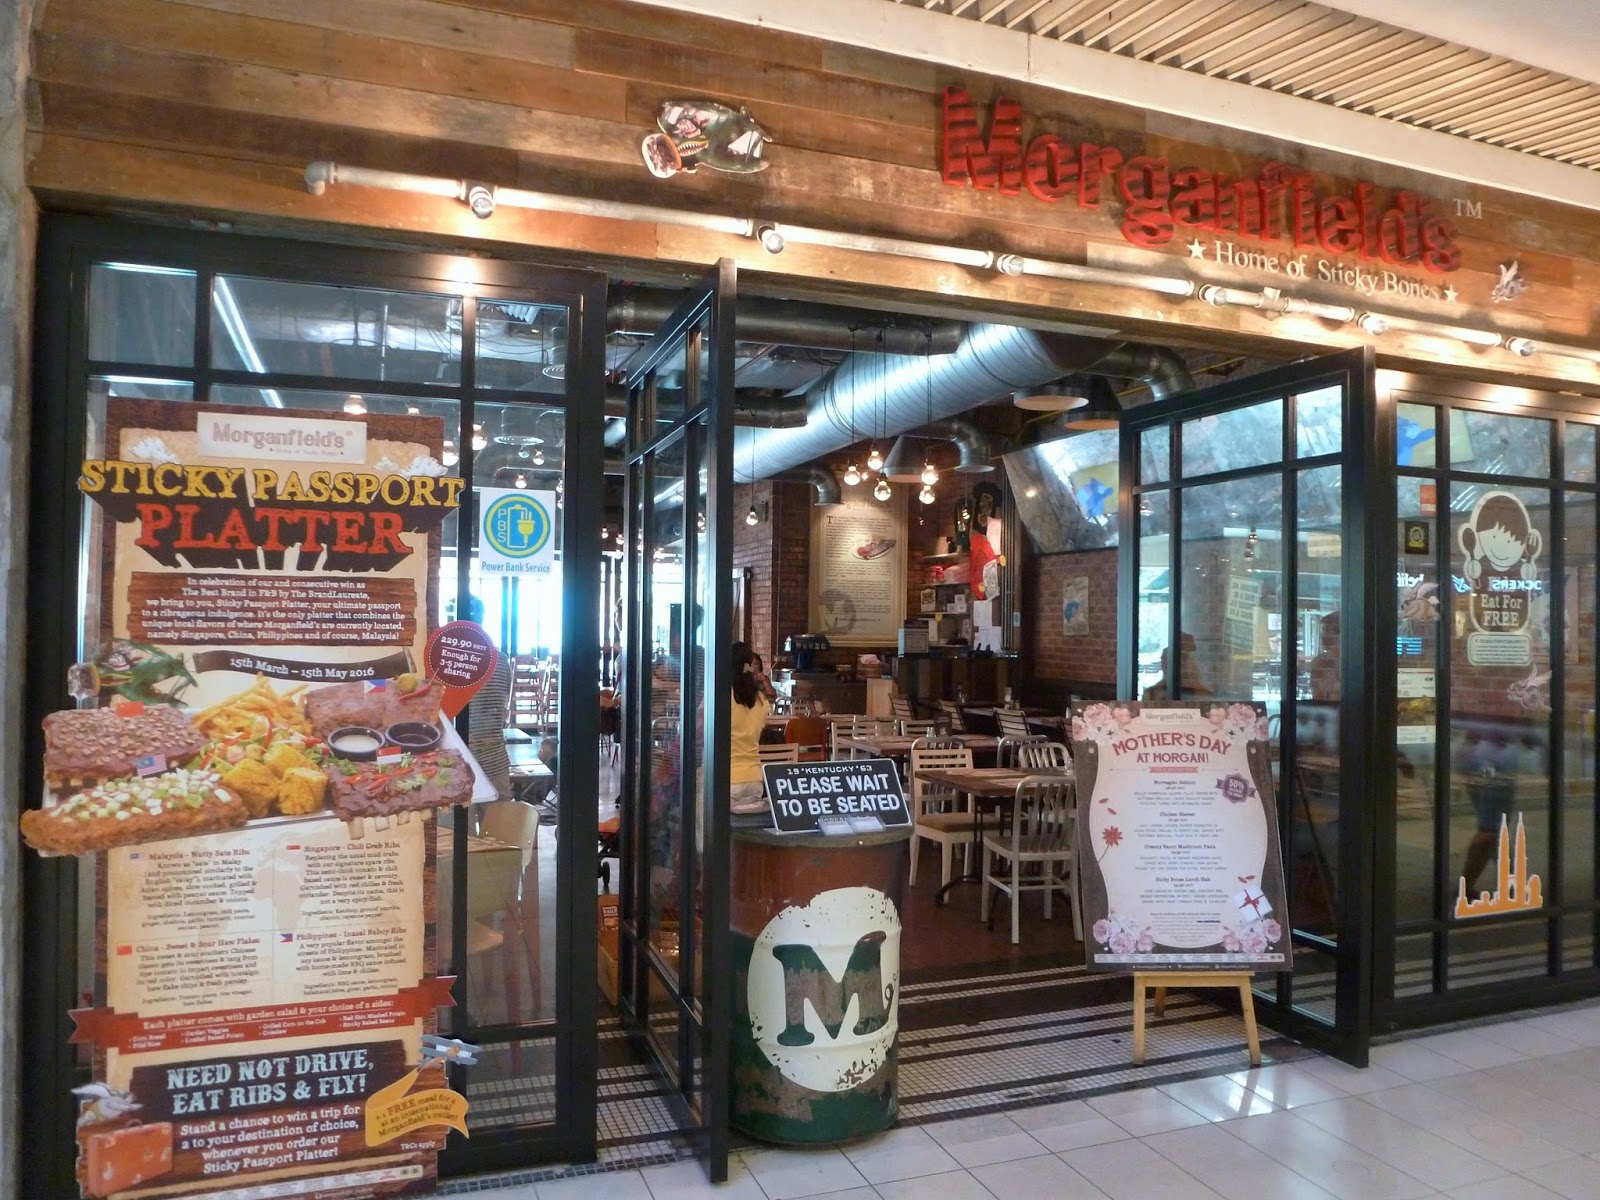 Penang Food For Thought: Morganfield's